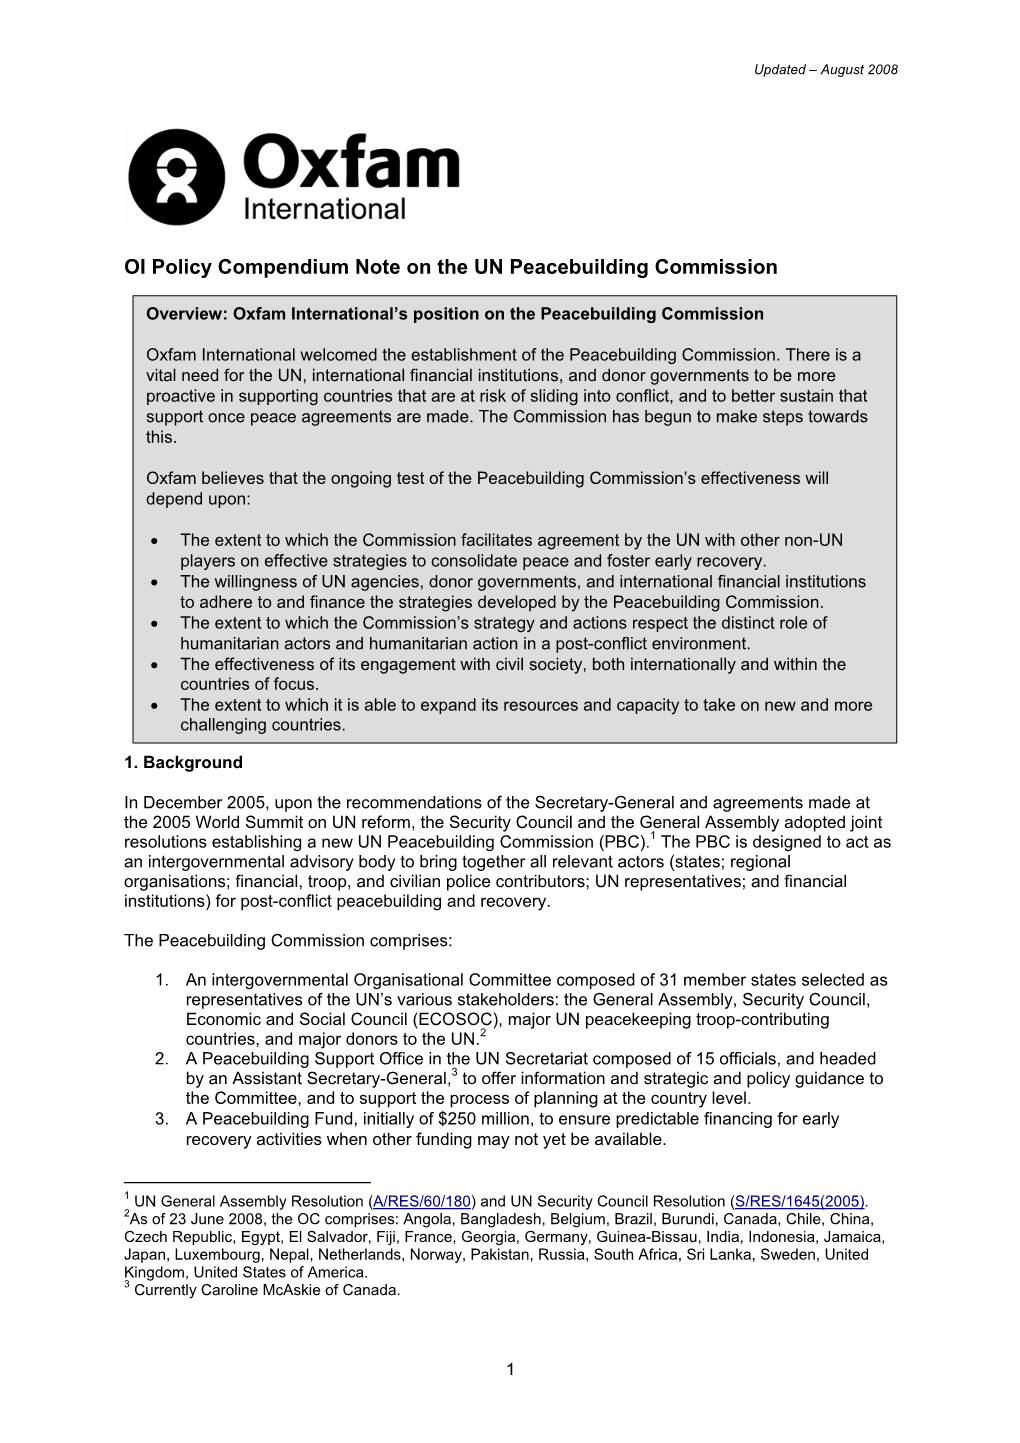 Update on the Peacebuilding Commissioin 10 March 2006